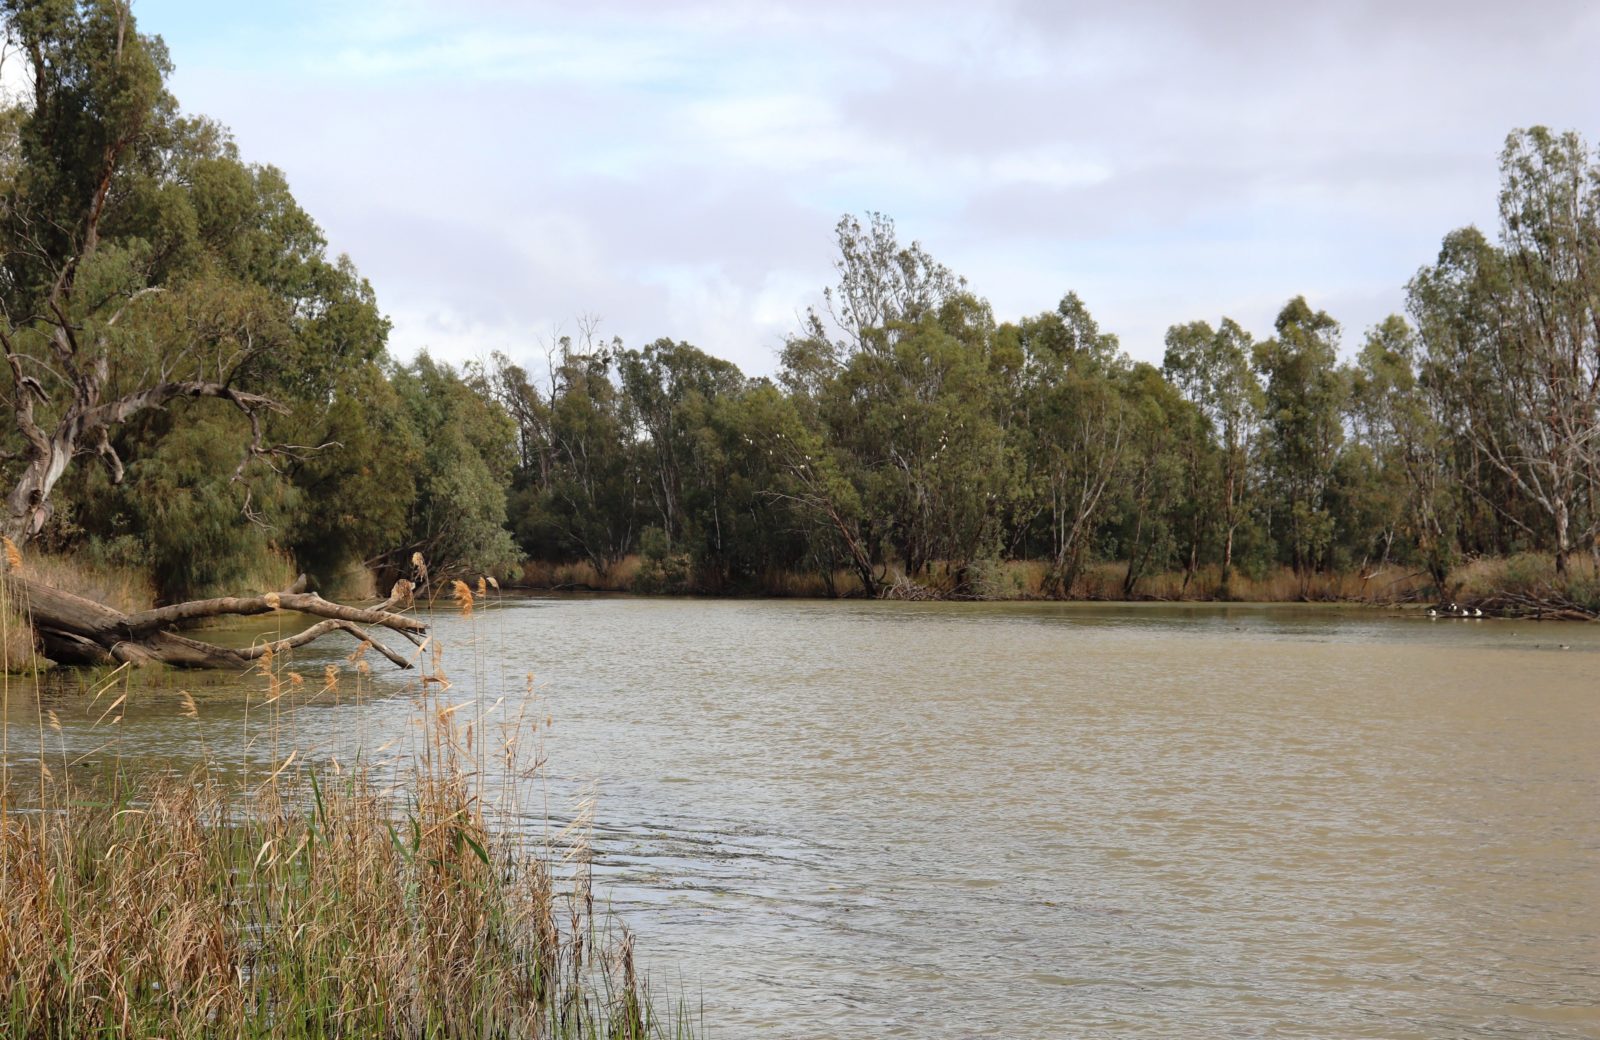 The Reserve is popular spot for camping and river activities.